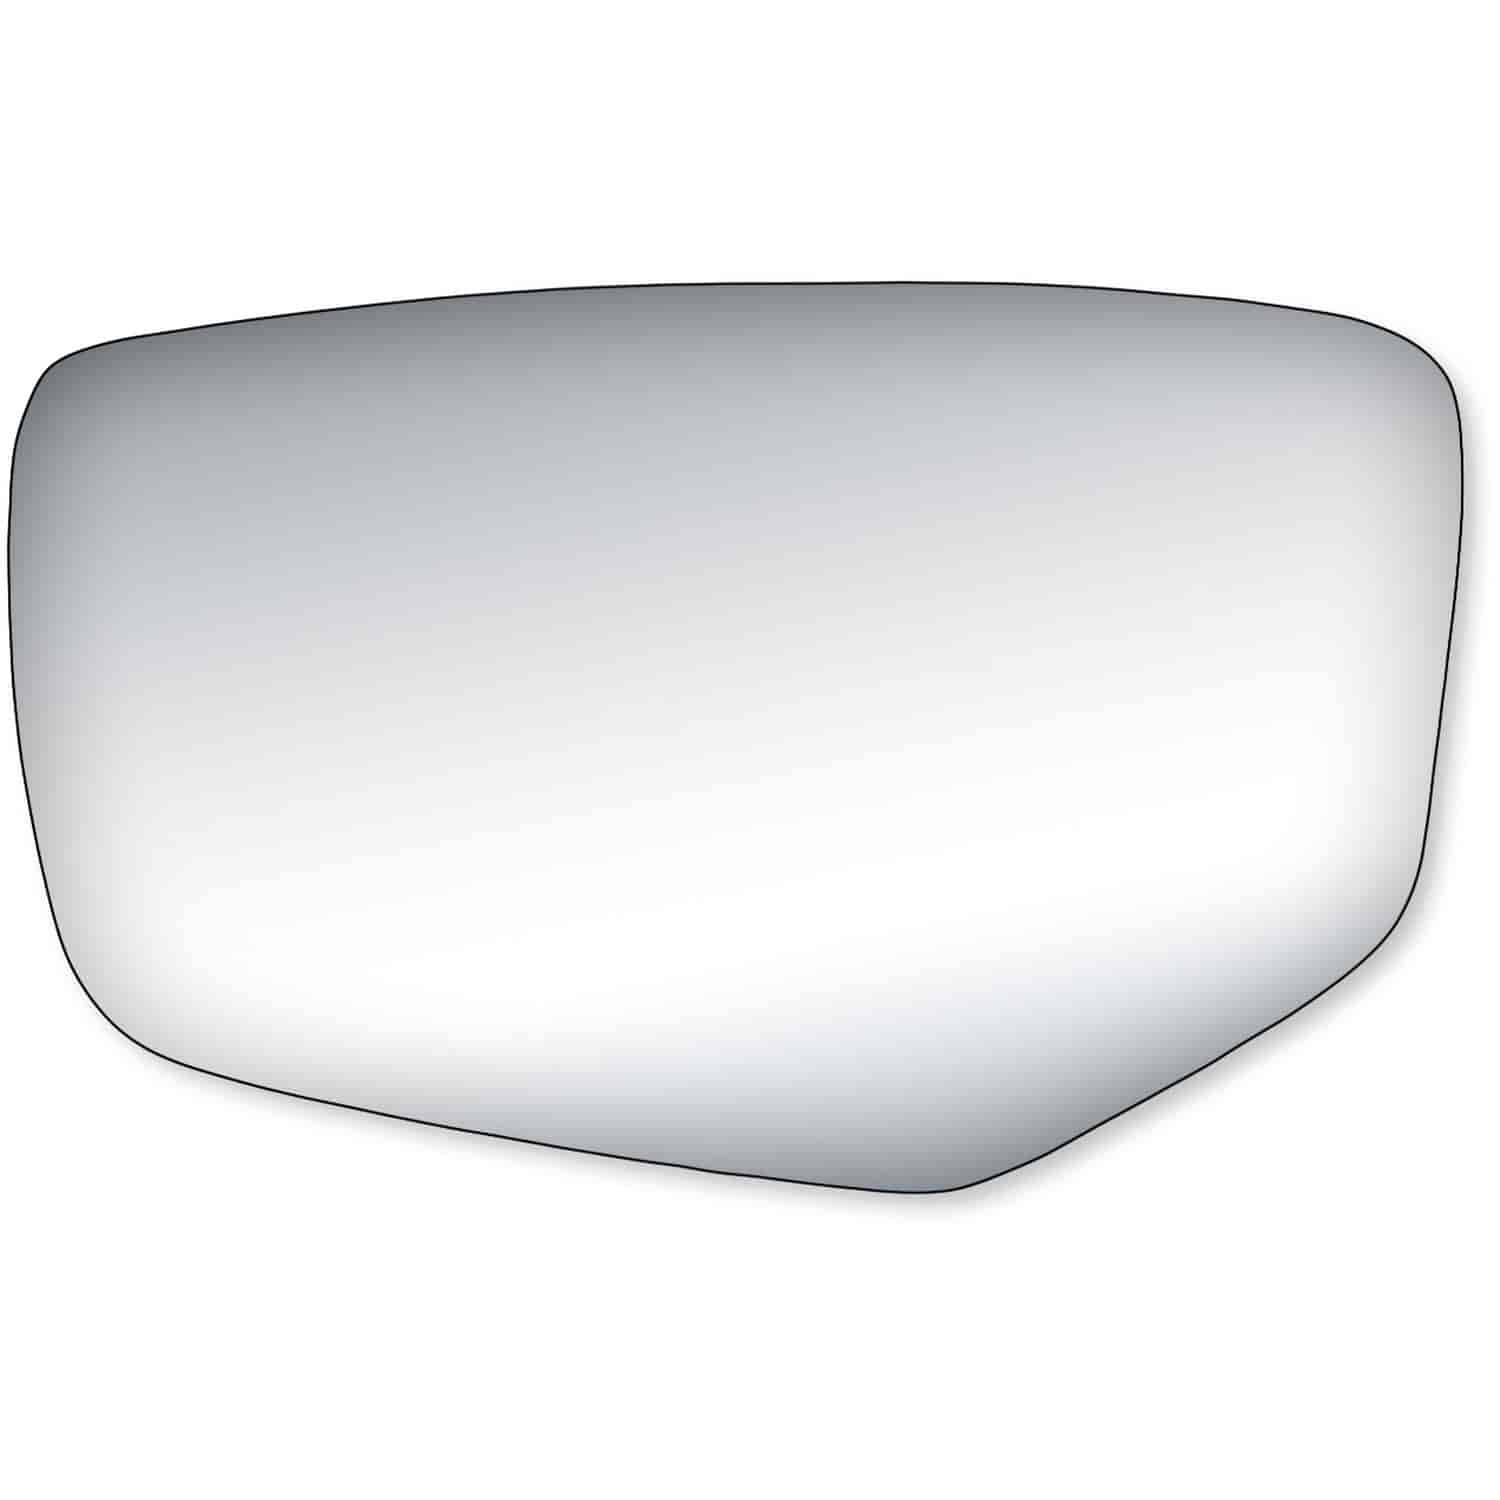 Replacement Glass for 08-12 Accord Coupe/ Sedan the glass measures 4 1/2 tall by 7 1/4 wide and 7 1/